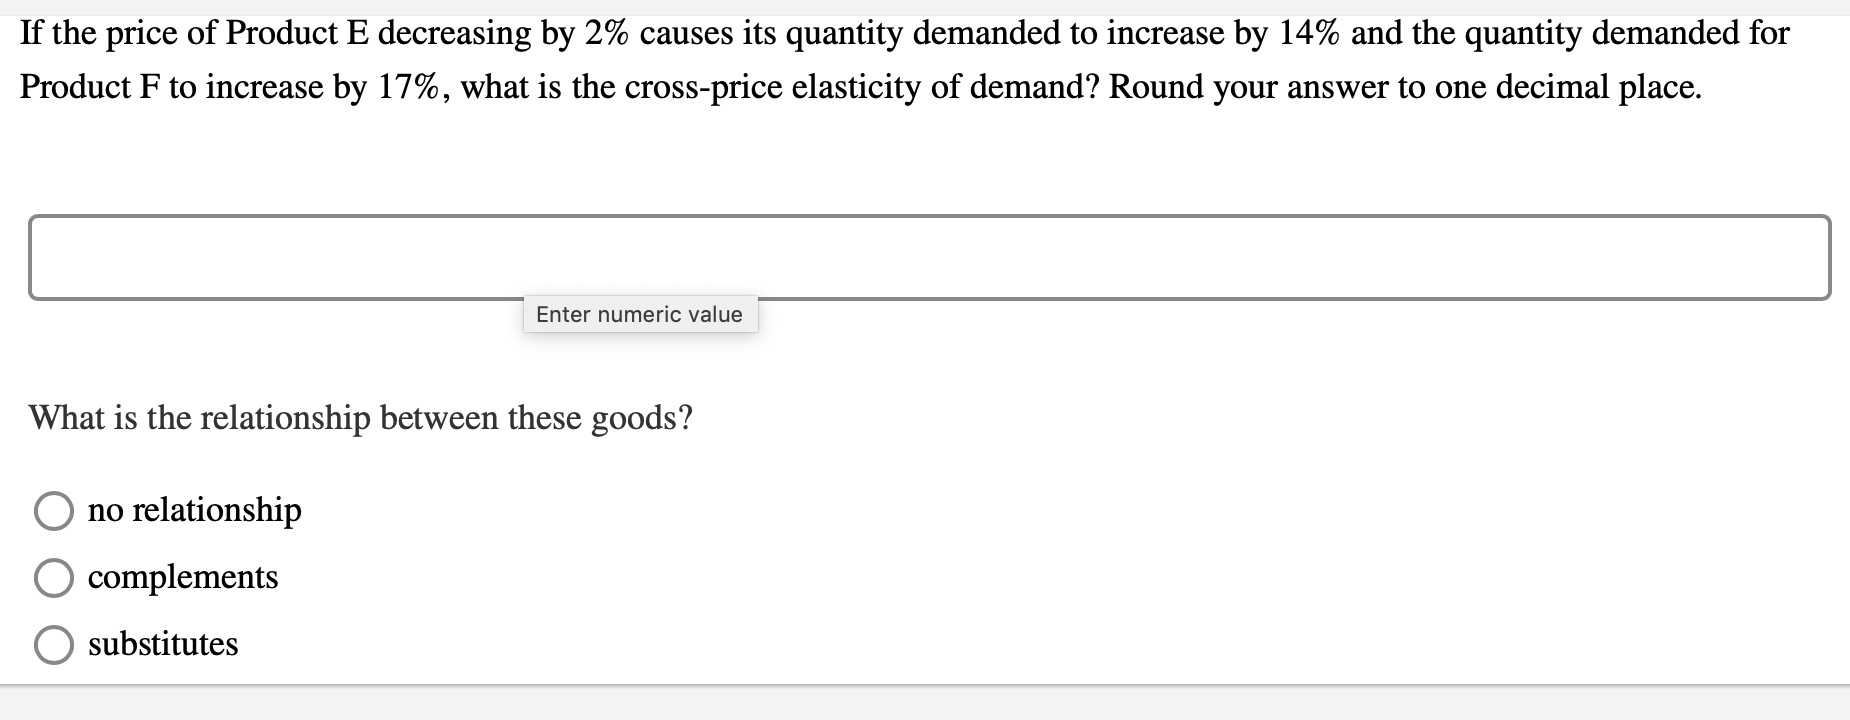 If the price of Product E decreasing by 2% causes its quantity demanded to increase by 14% and the quantity demanded for
Product F to increase by 17%, what is the cross-price elasticity of demand? Round your answer to one decimal place.
Enter numeric value
What is the relationship between these goods?
no relationship
complements
substitutes
